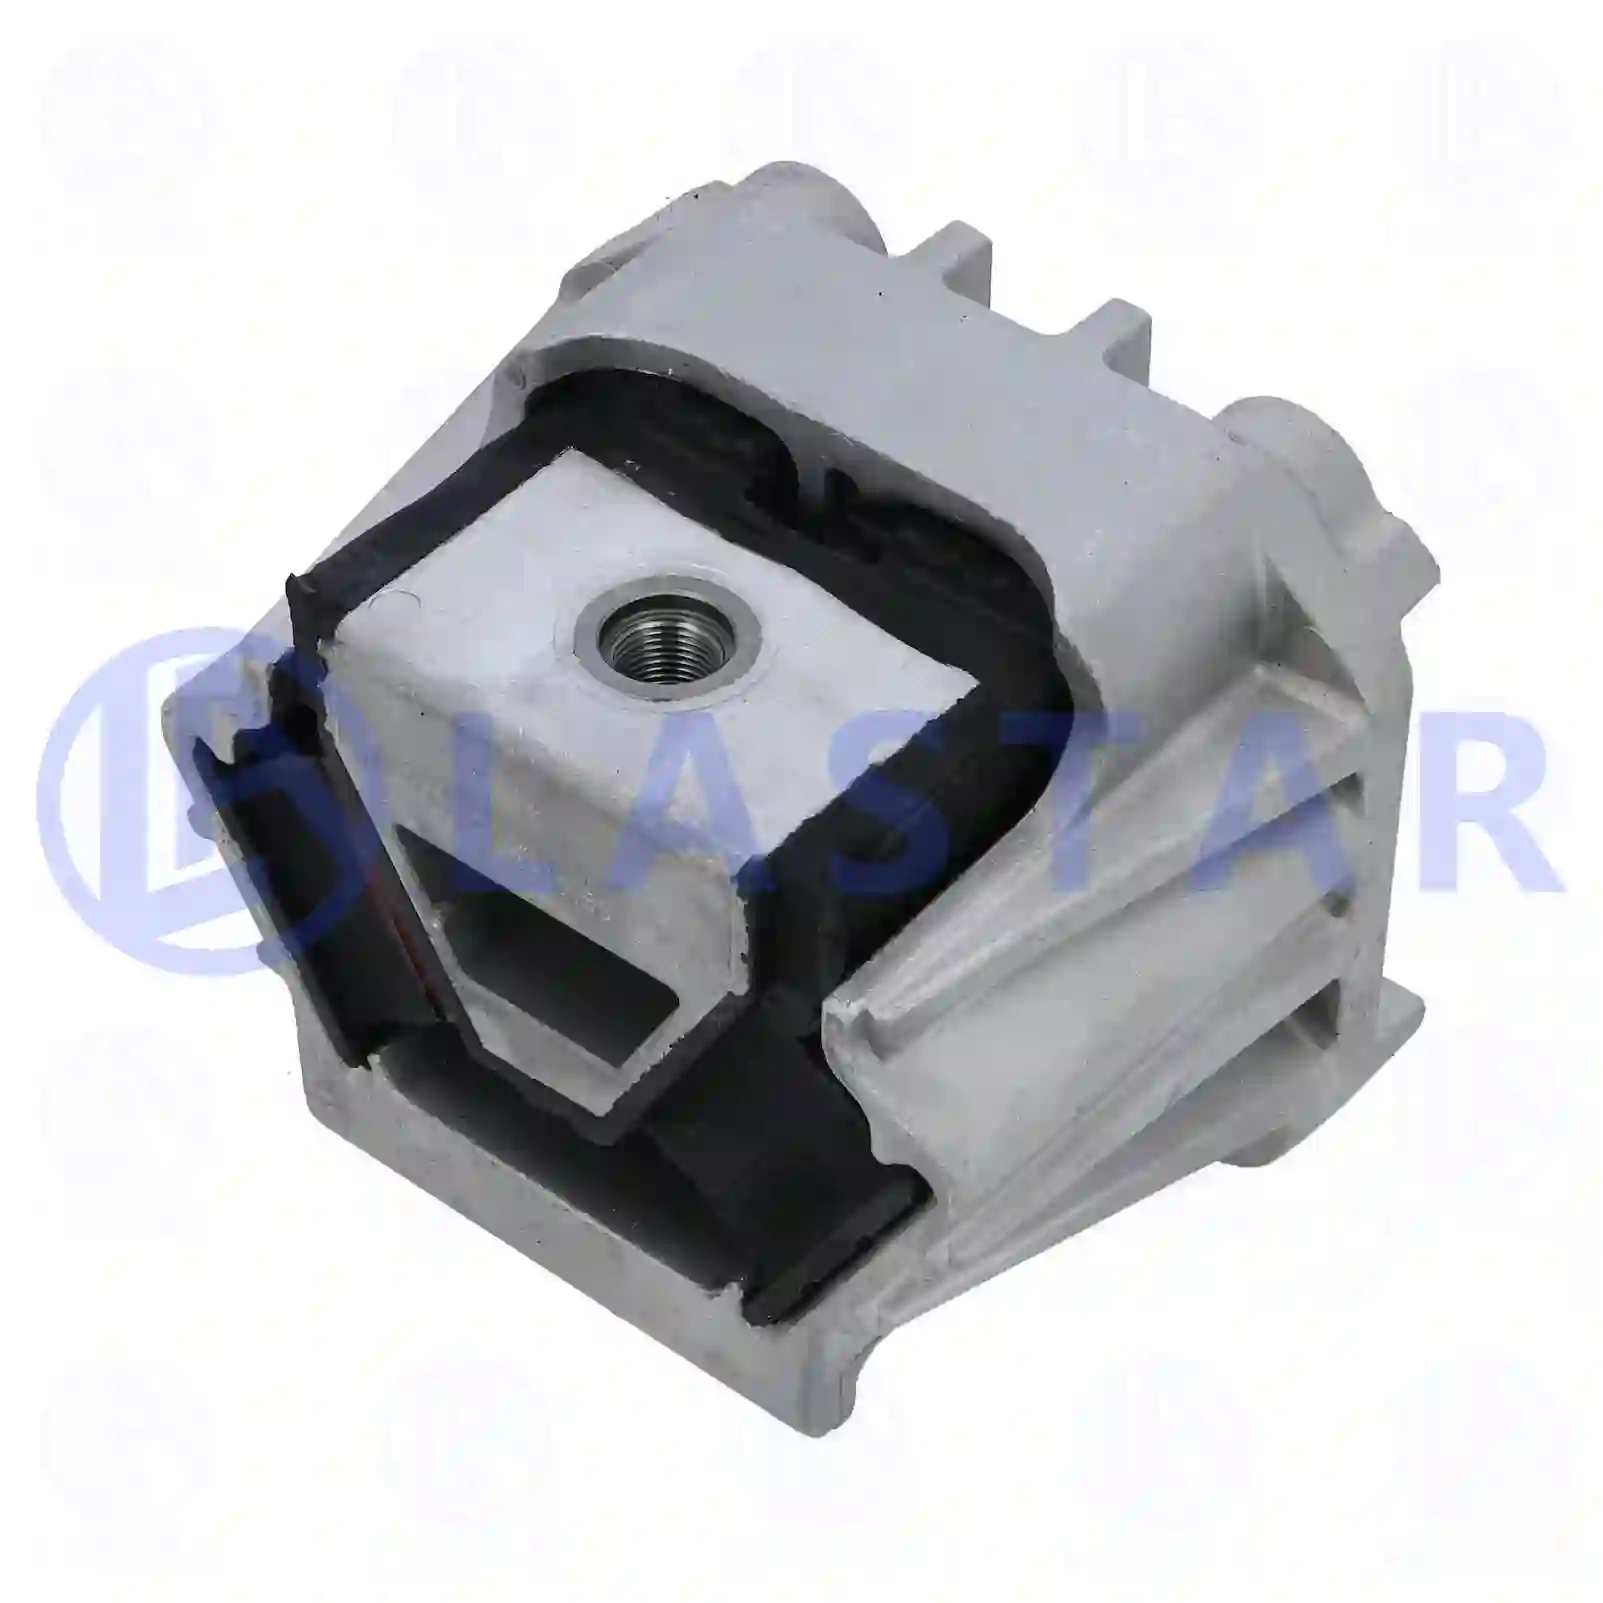 Engine mounting, 77702407, 9402401218, , , , ||  77702407 Lastar Spare Part | Truck Spare Parts, Auotomotive Spare Parts Engine mounting, 77702407, 9402401218, , , , ||  77702407 Lastar Spare Part | Truck Spare Parts, Auotomotive Spare Parts